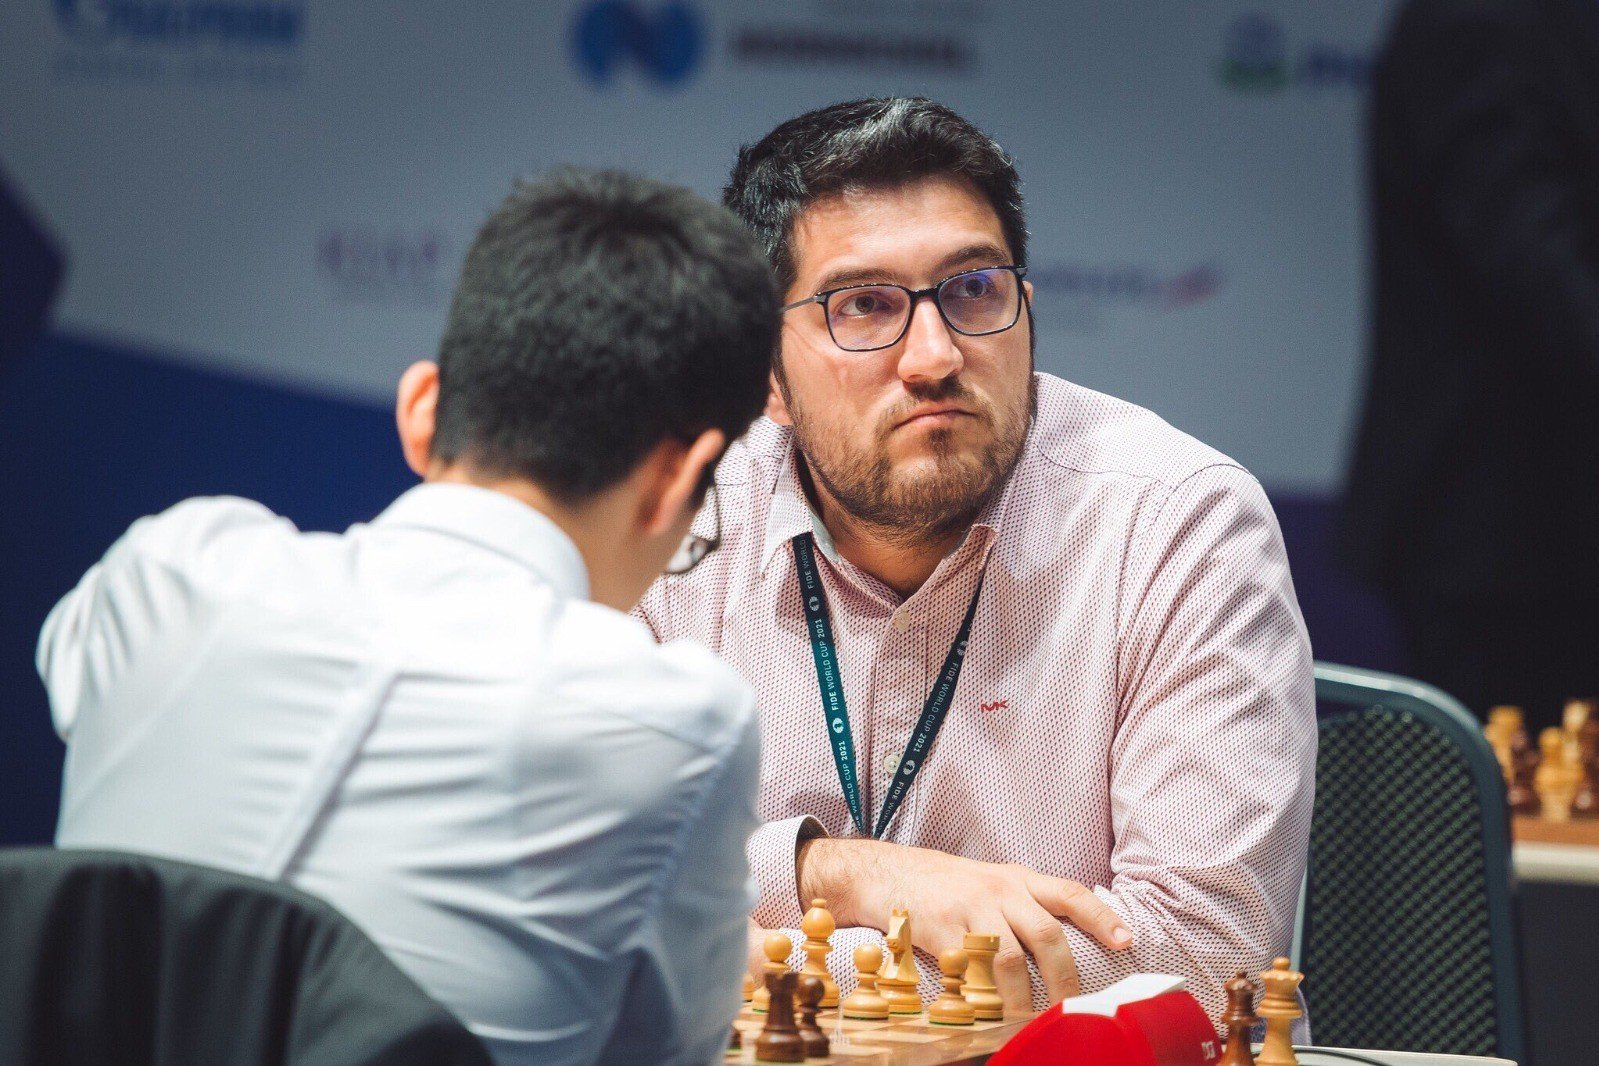 Chess players to take risks in match against Azerbaijani opponent - grandmaster